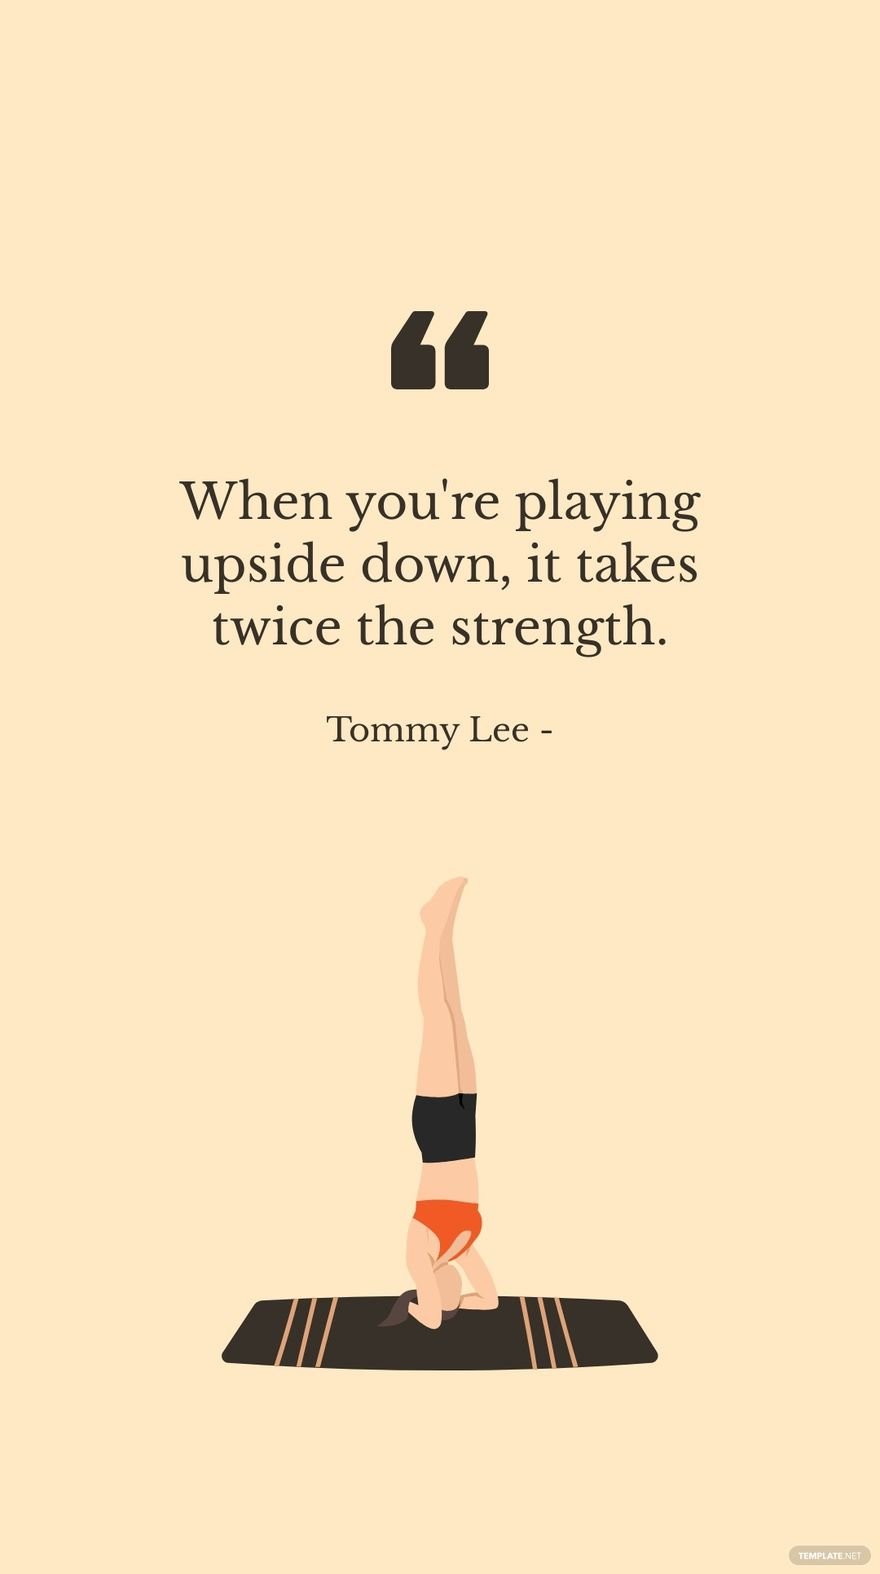 Tommy Lee - When you're playing upside down, it takes twice the strength.